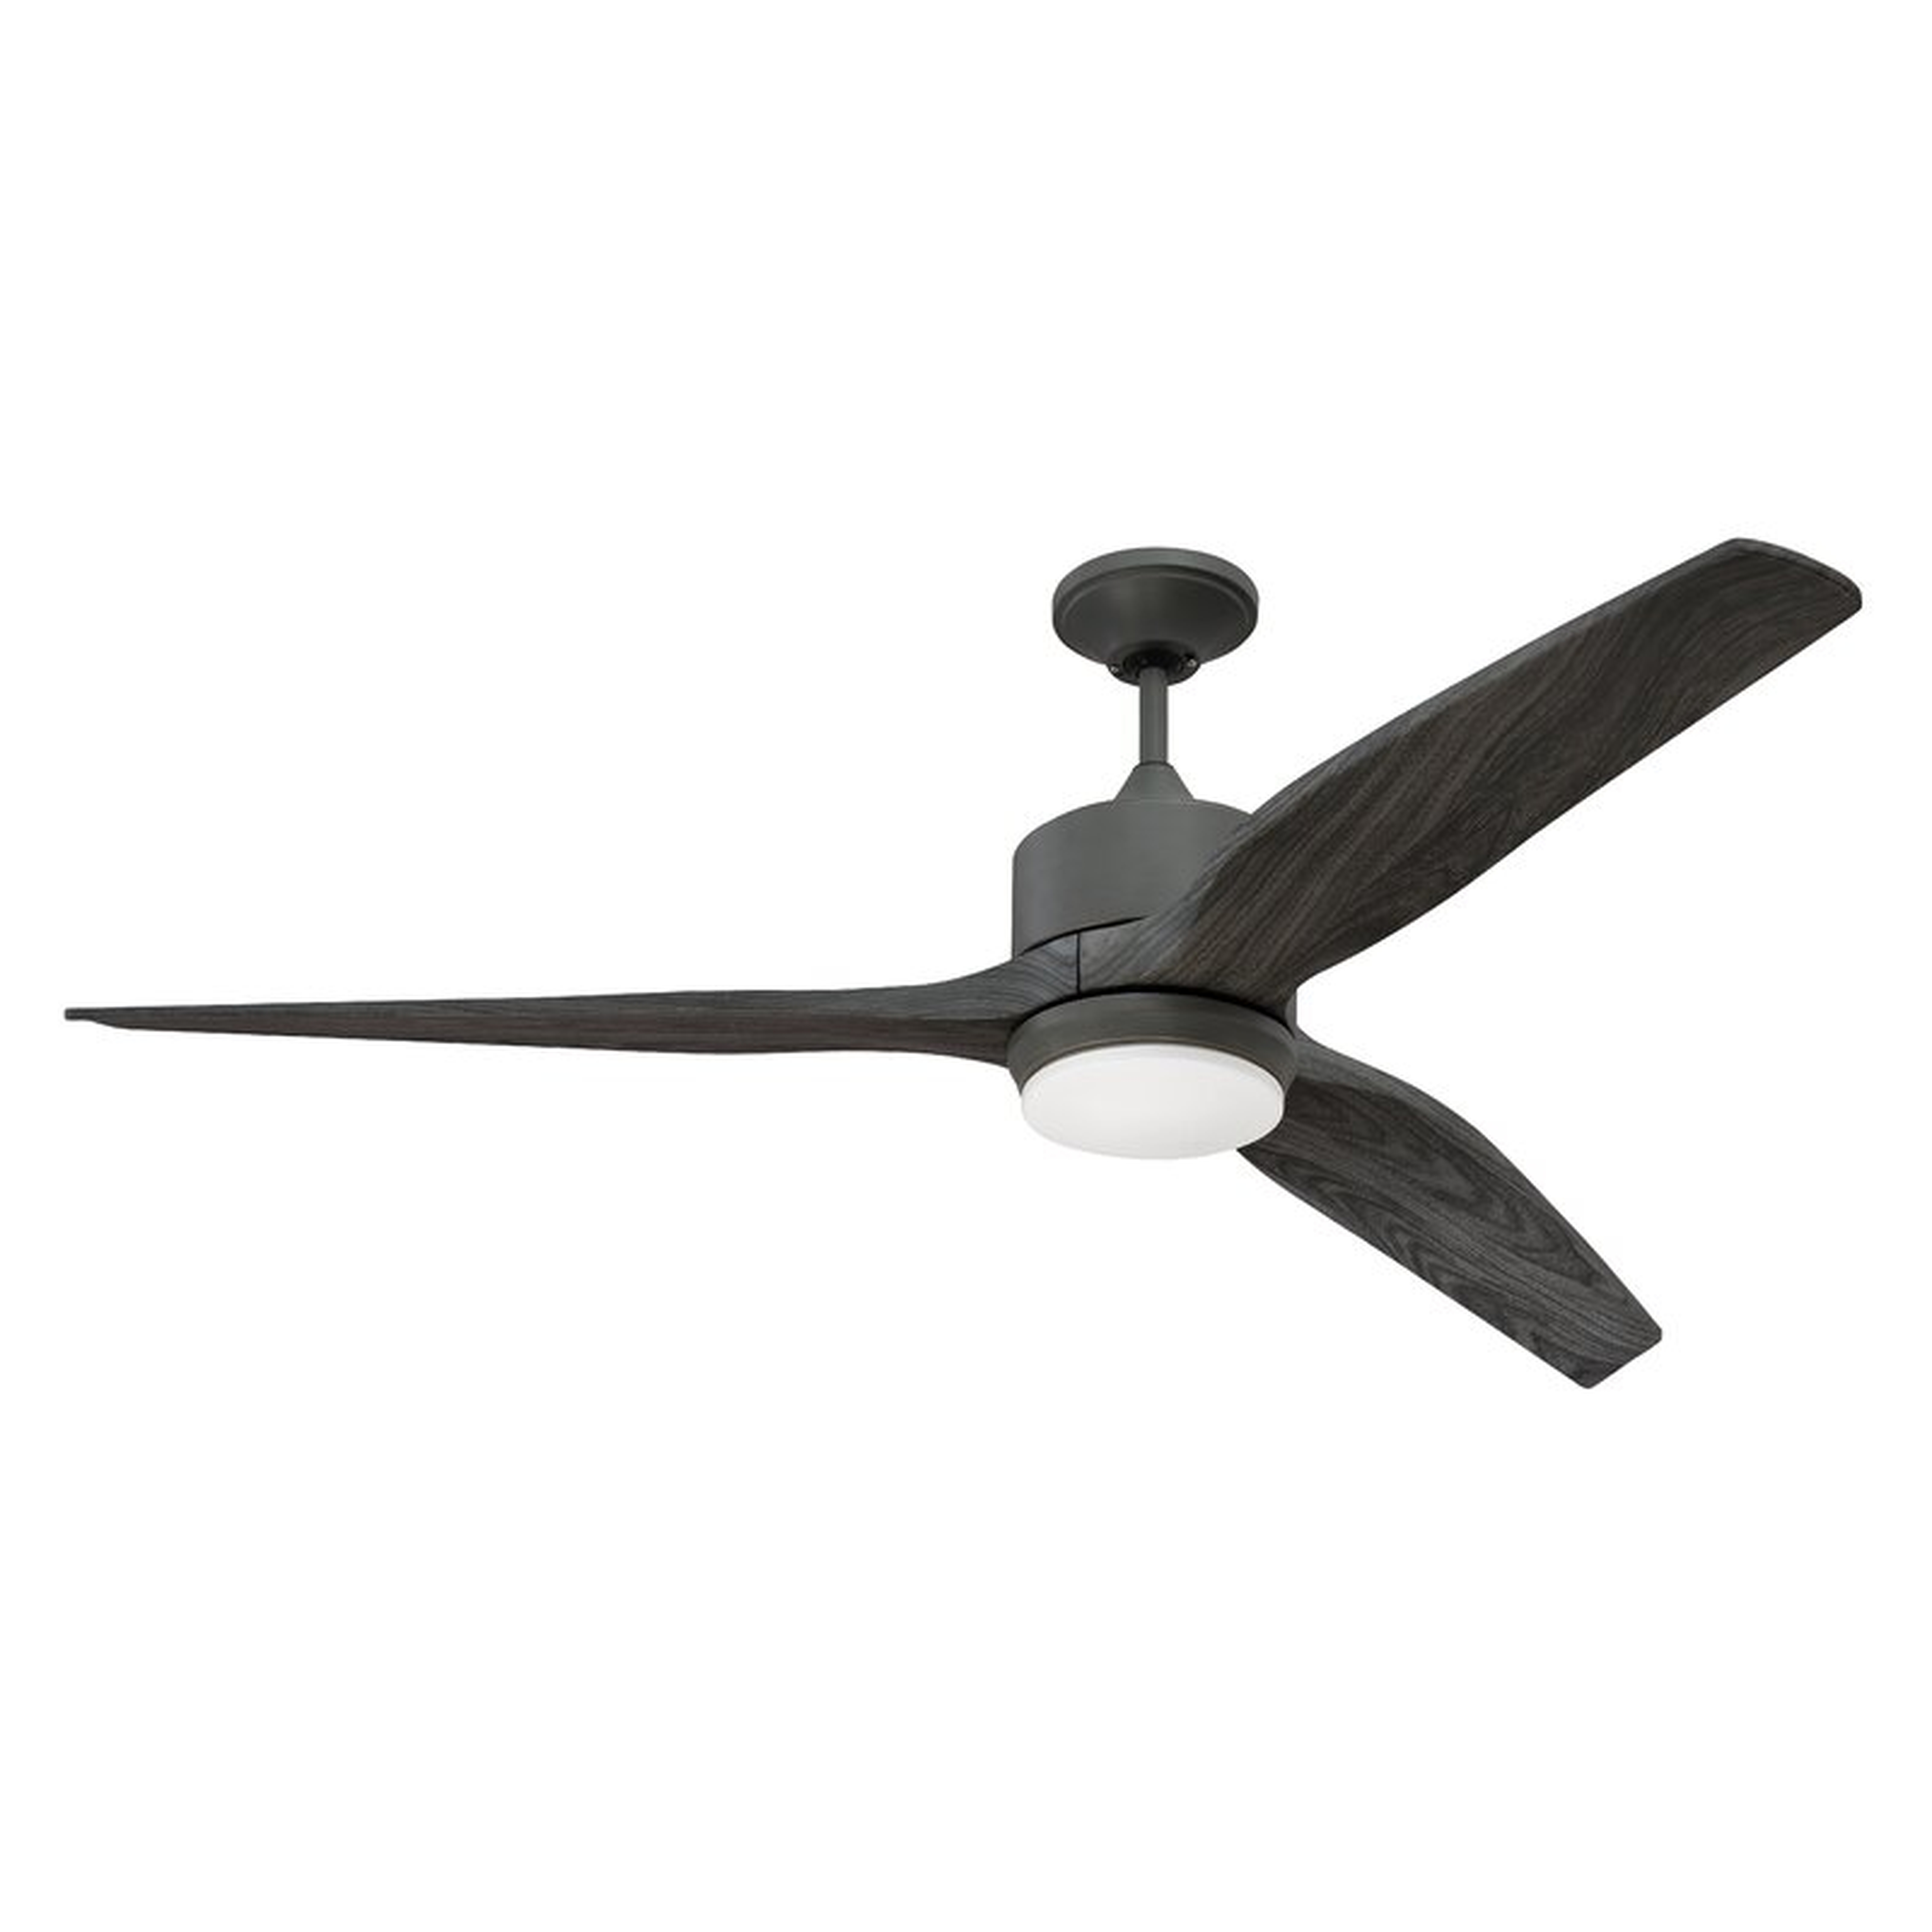 Paige 60" 3 - Blade Outdoor LED Standard Ceiling Fan with Light Kit Included - Wayfair